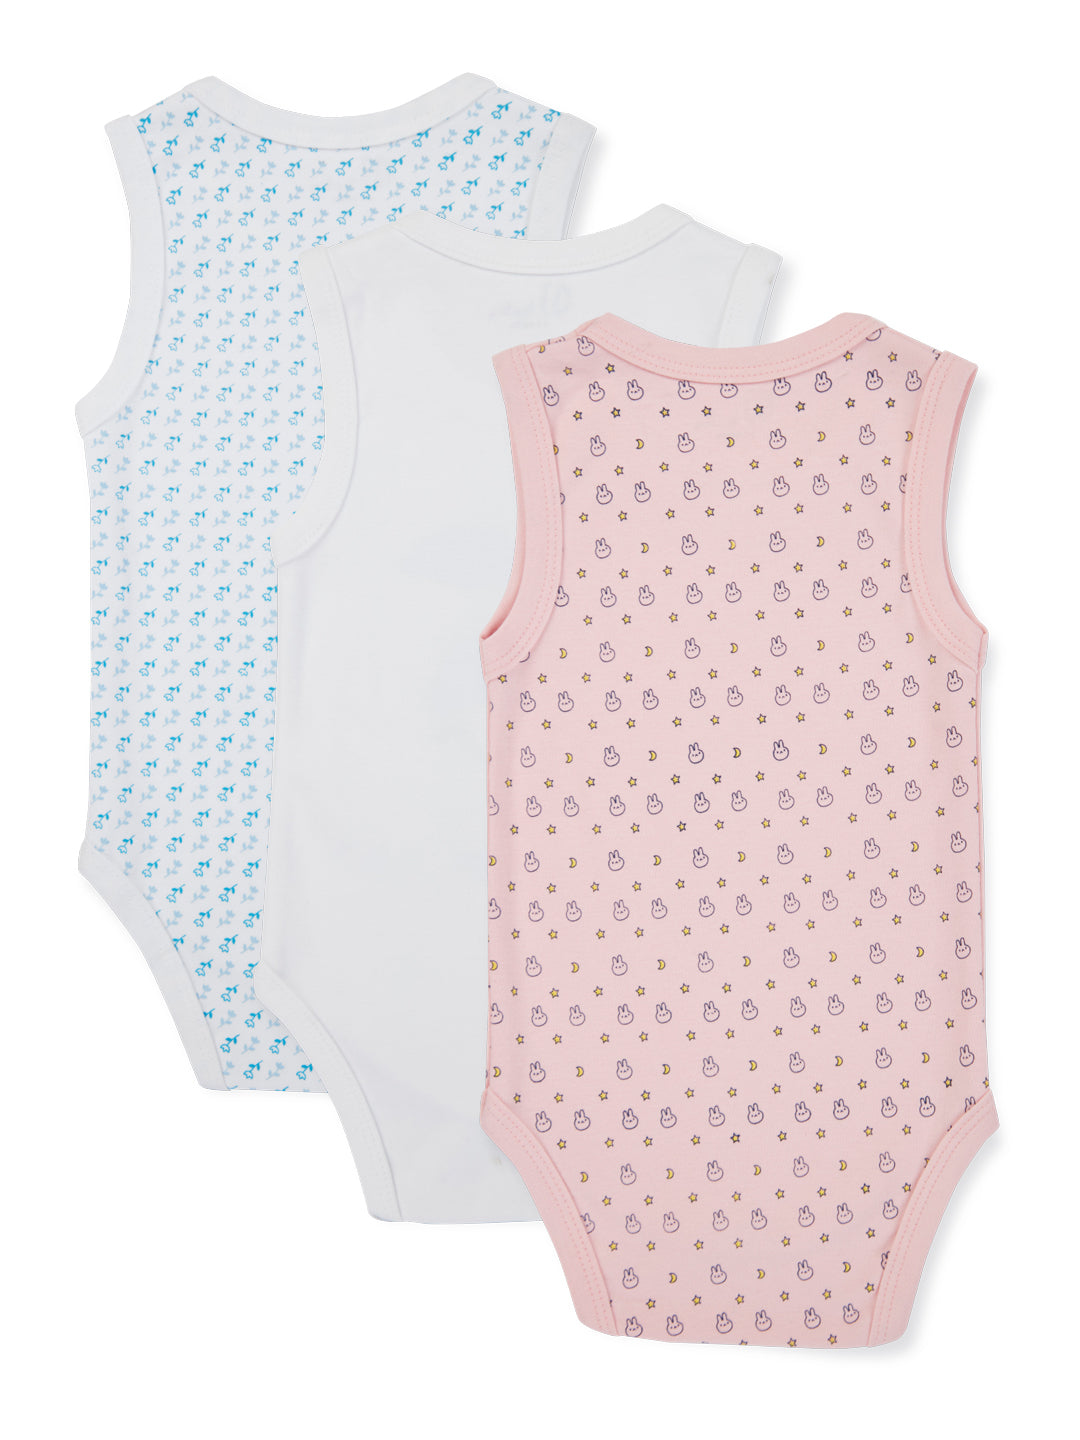 Baby Boys Set of 3 light coloured knitted rompers